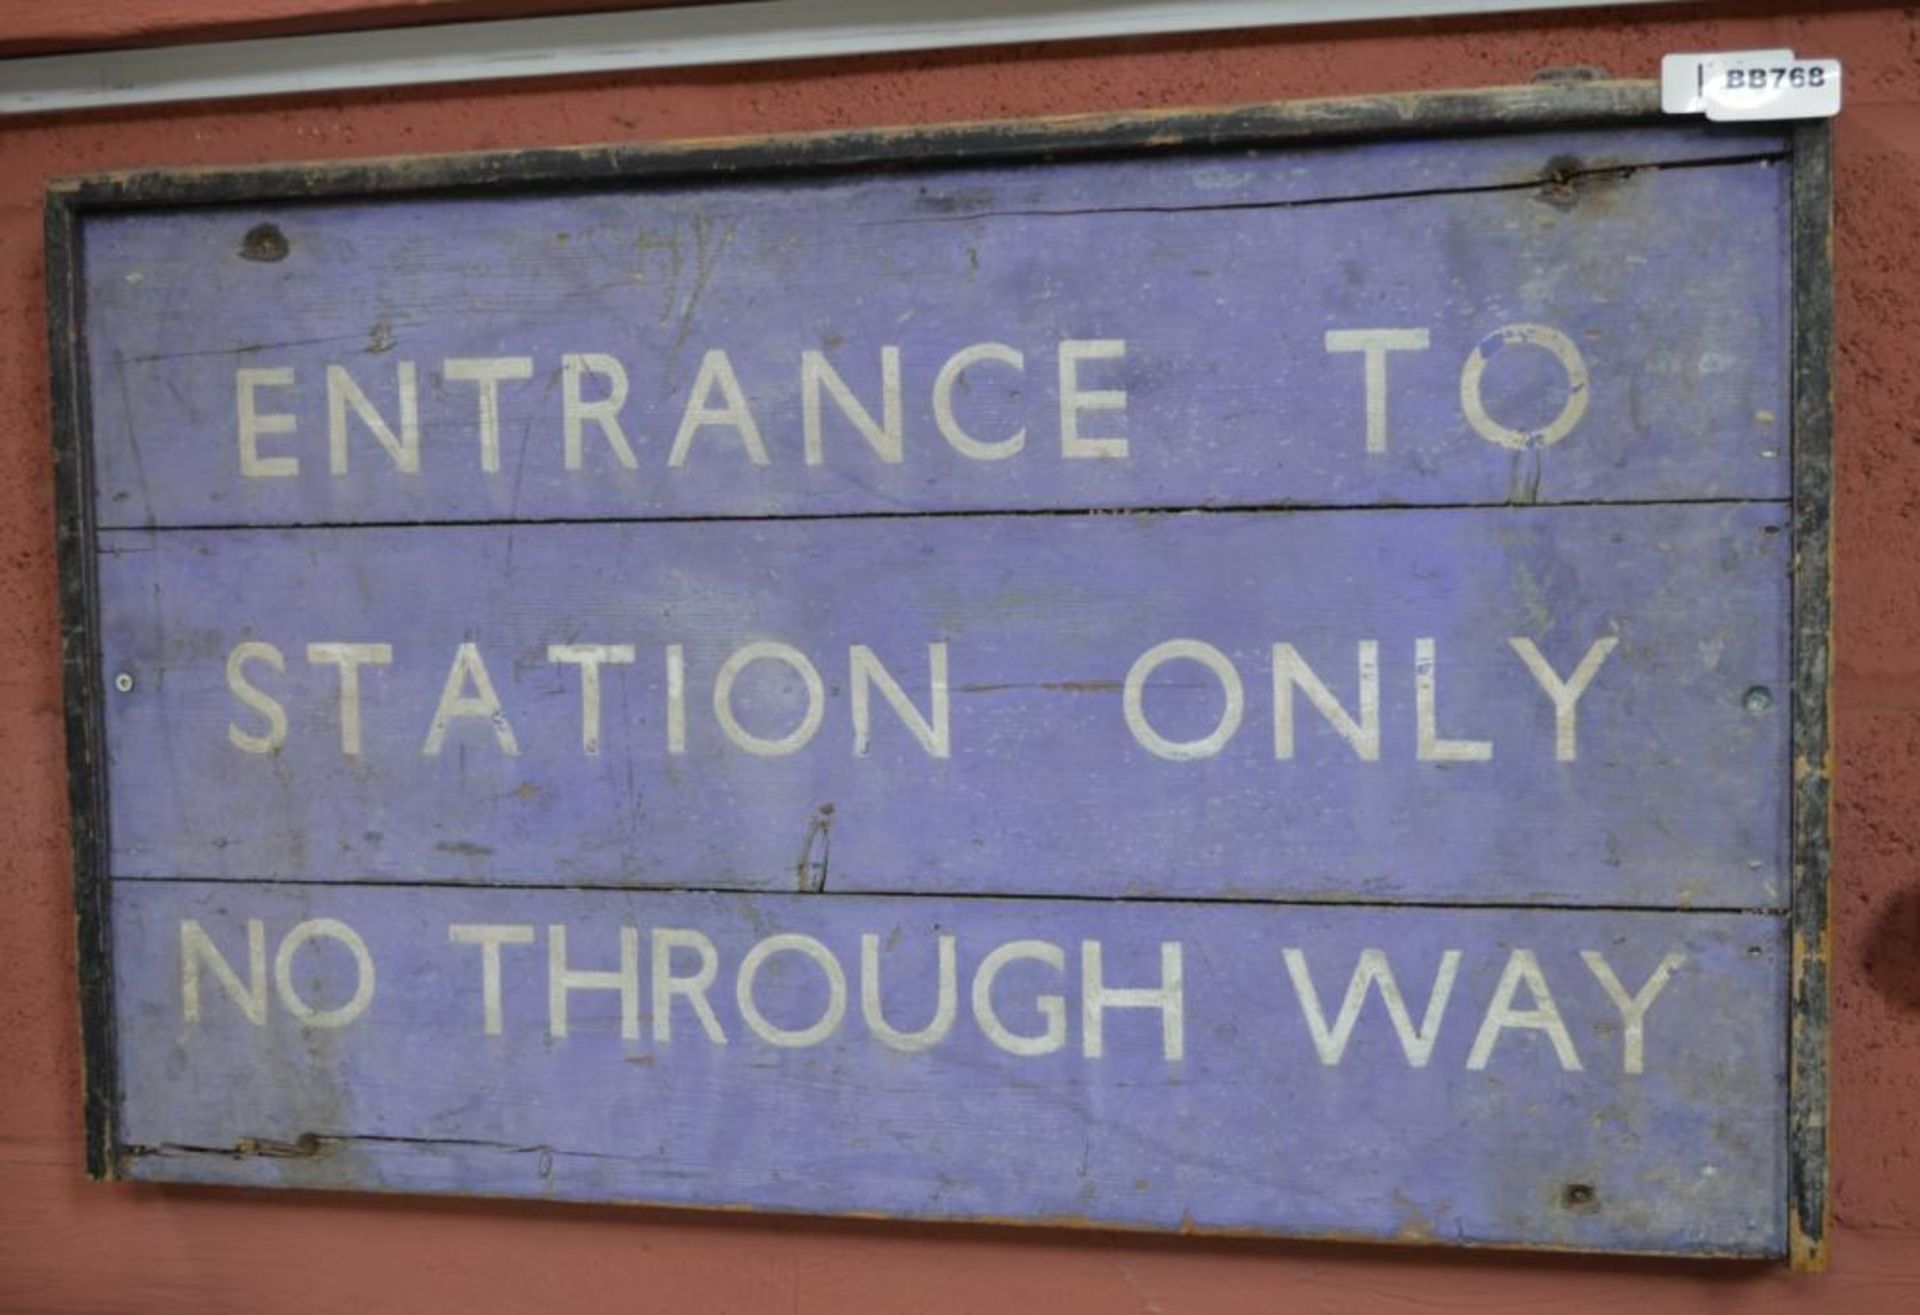 1 x Vintage Train Signage - Entrance To Station Only No Through Way - 32 x 18 Inches - Ref BB768 - C - Image 5 of 5